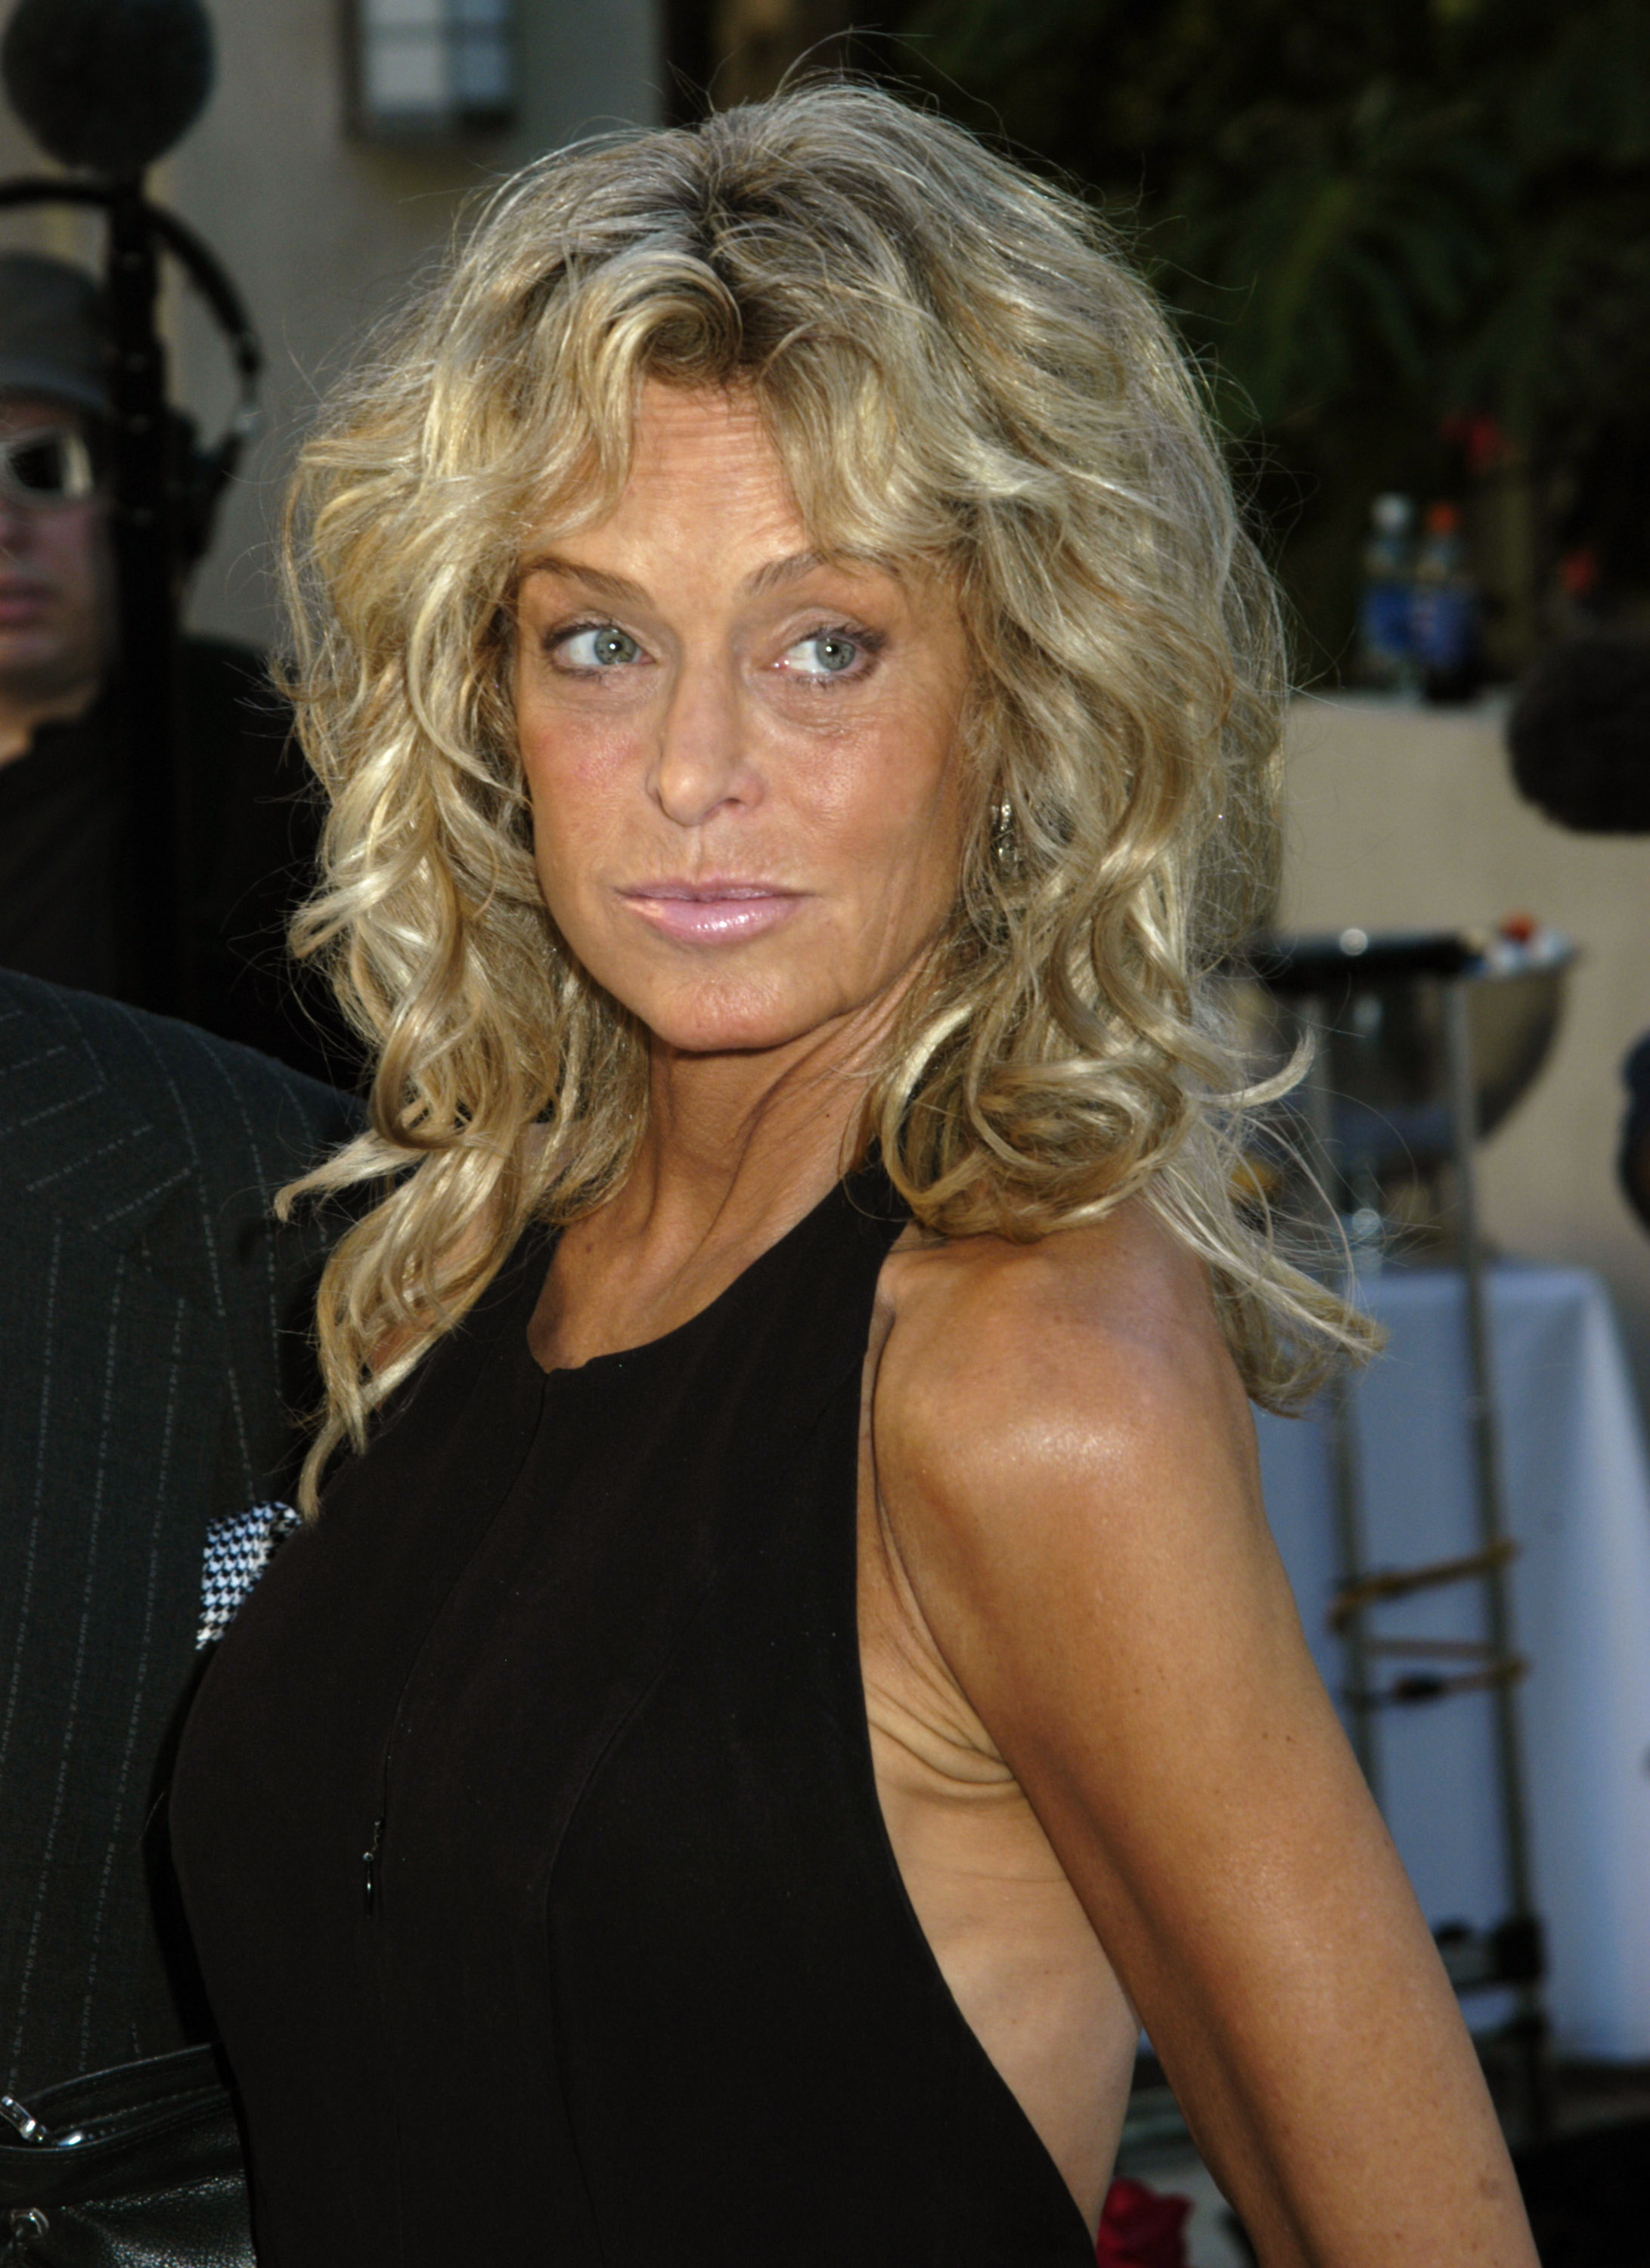 Farrah Fawcett in Los Angeles, California, 2005 | Source: Getty Images